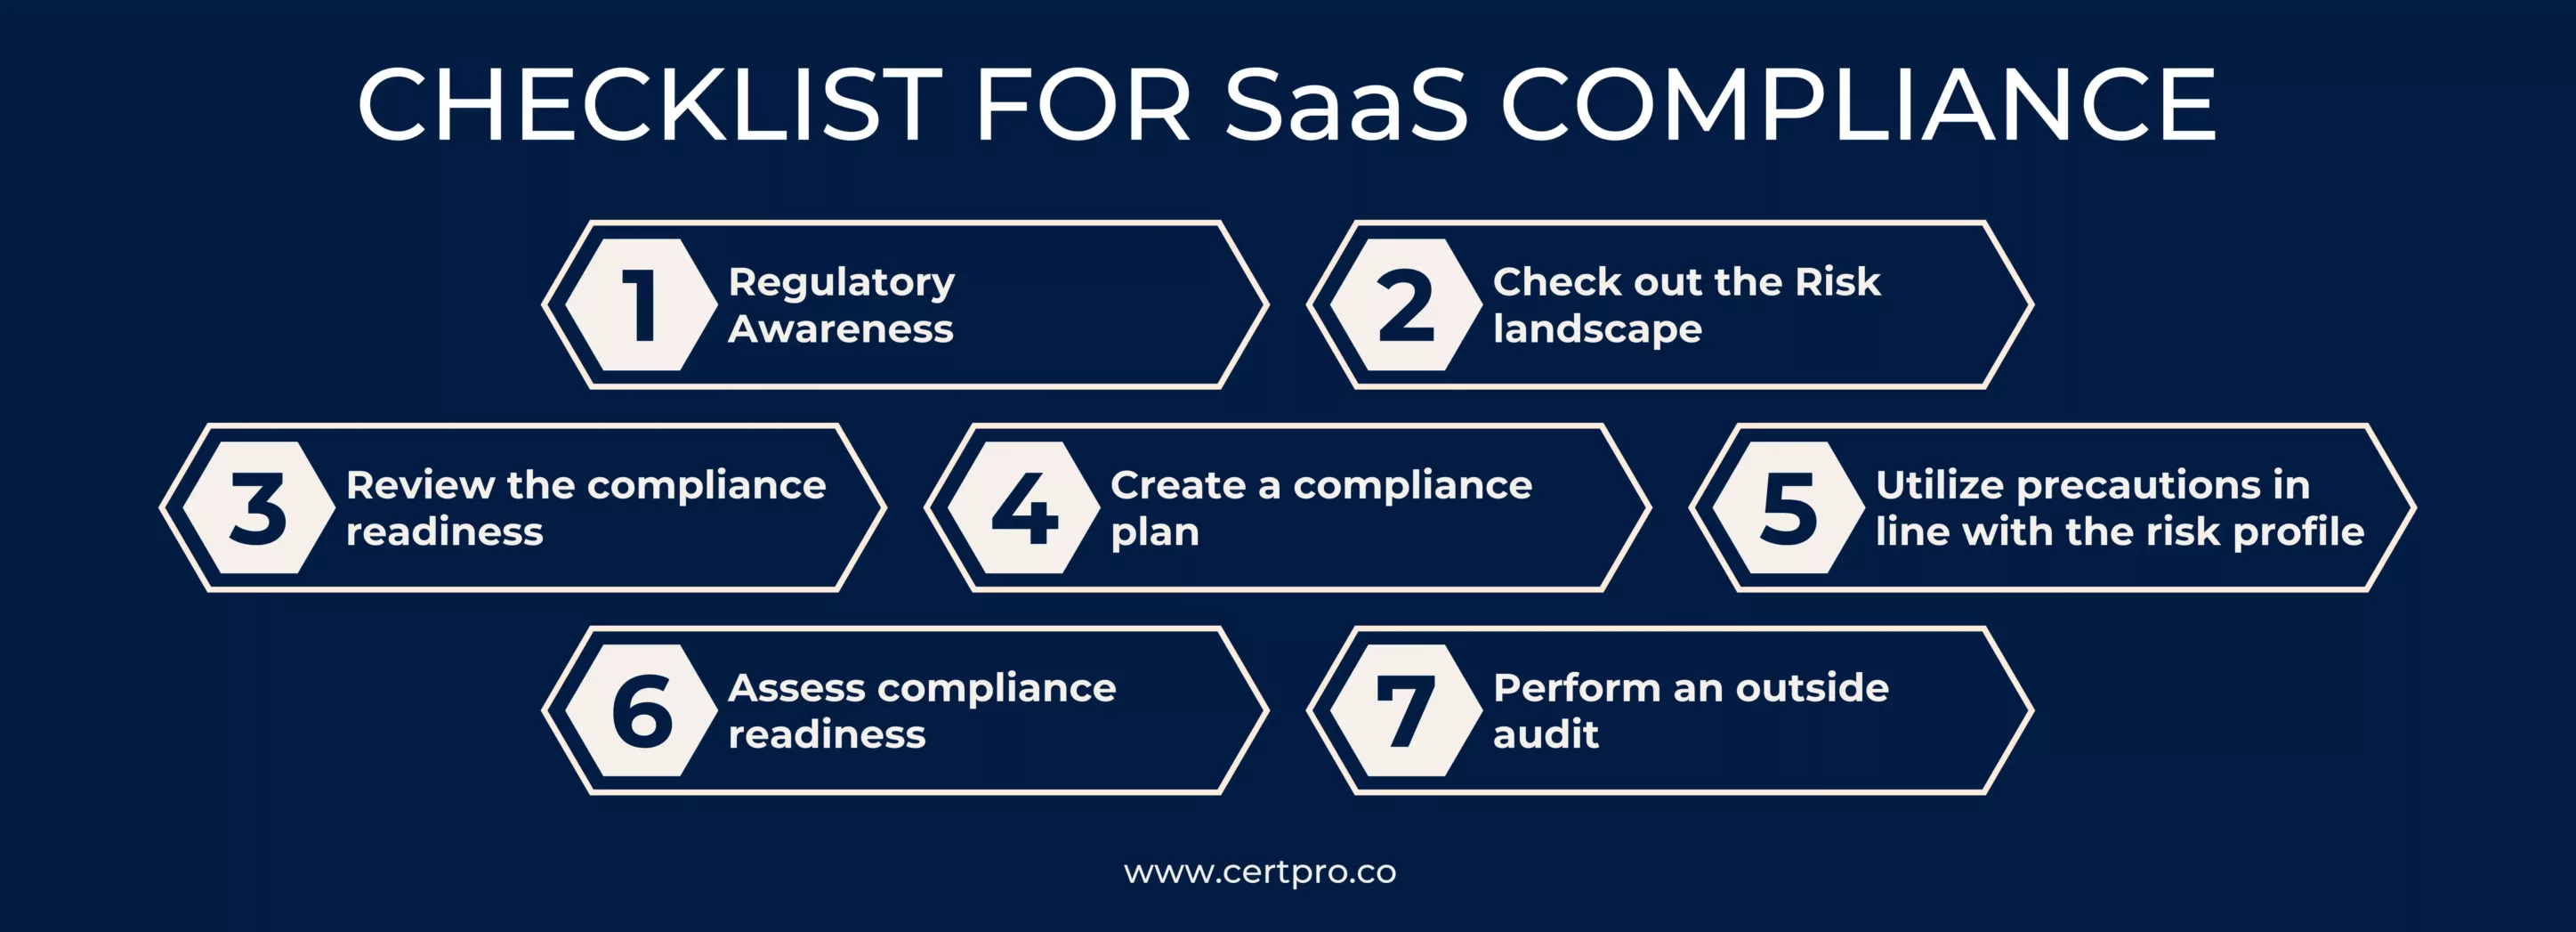 Checklist for SaaS